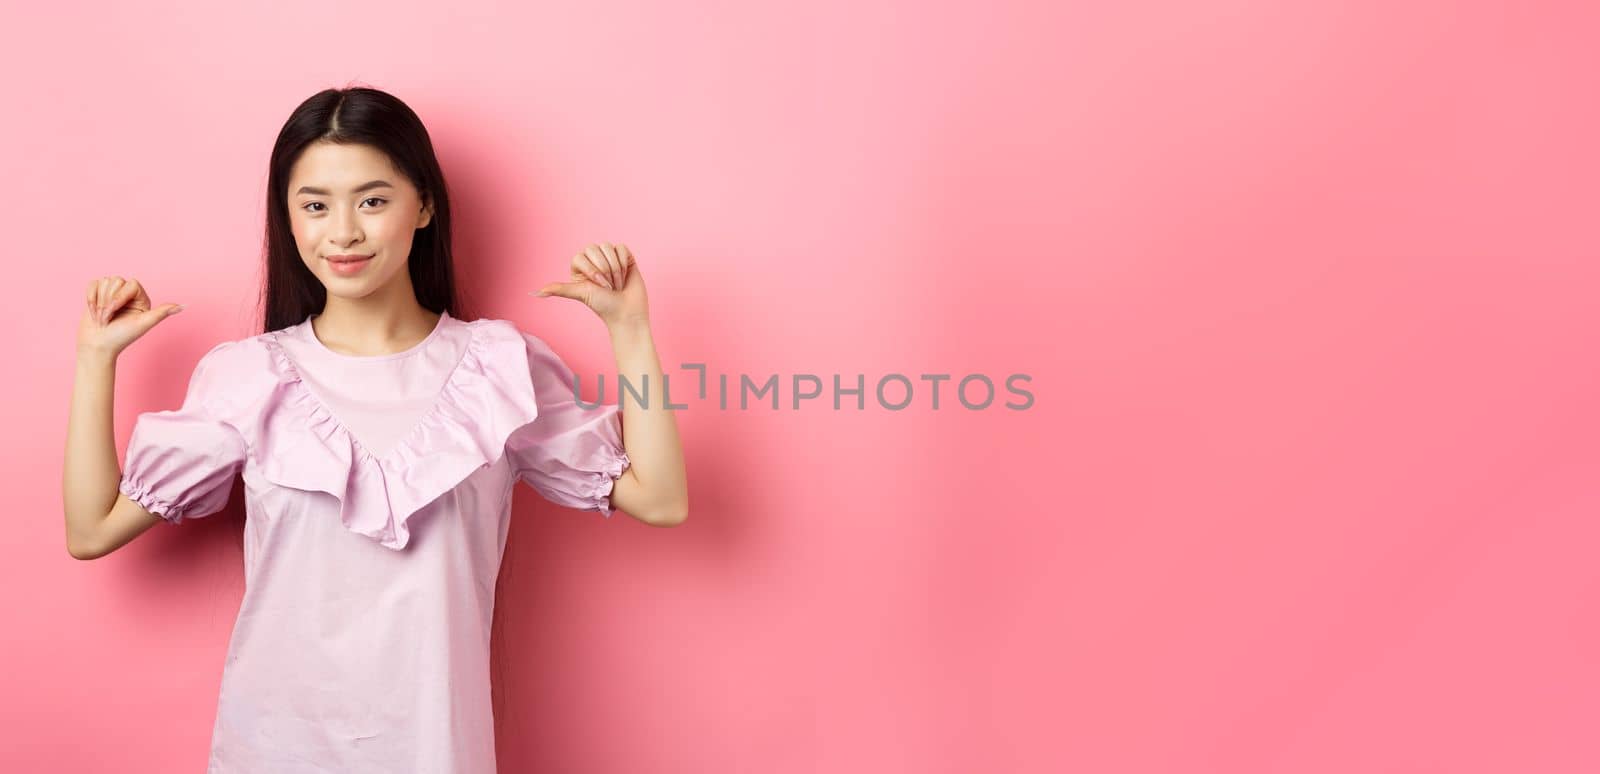 Confident asian girl smiling, pointing at herself, self-promoting personal achievements, standing in dress on pink background.